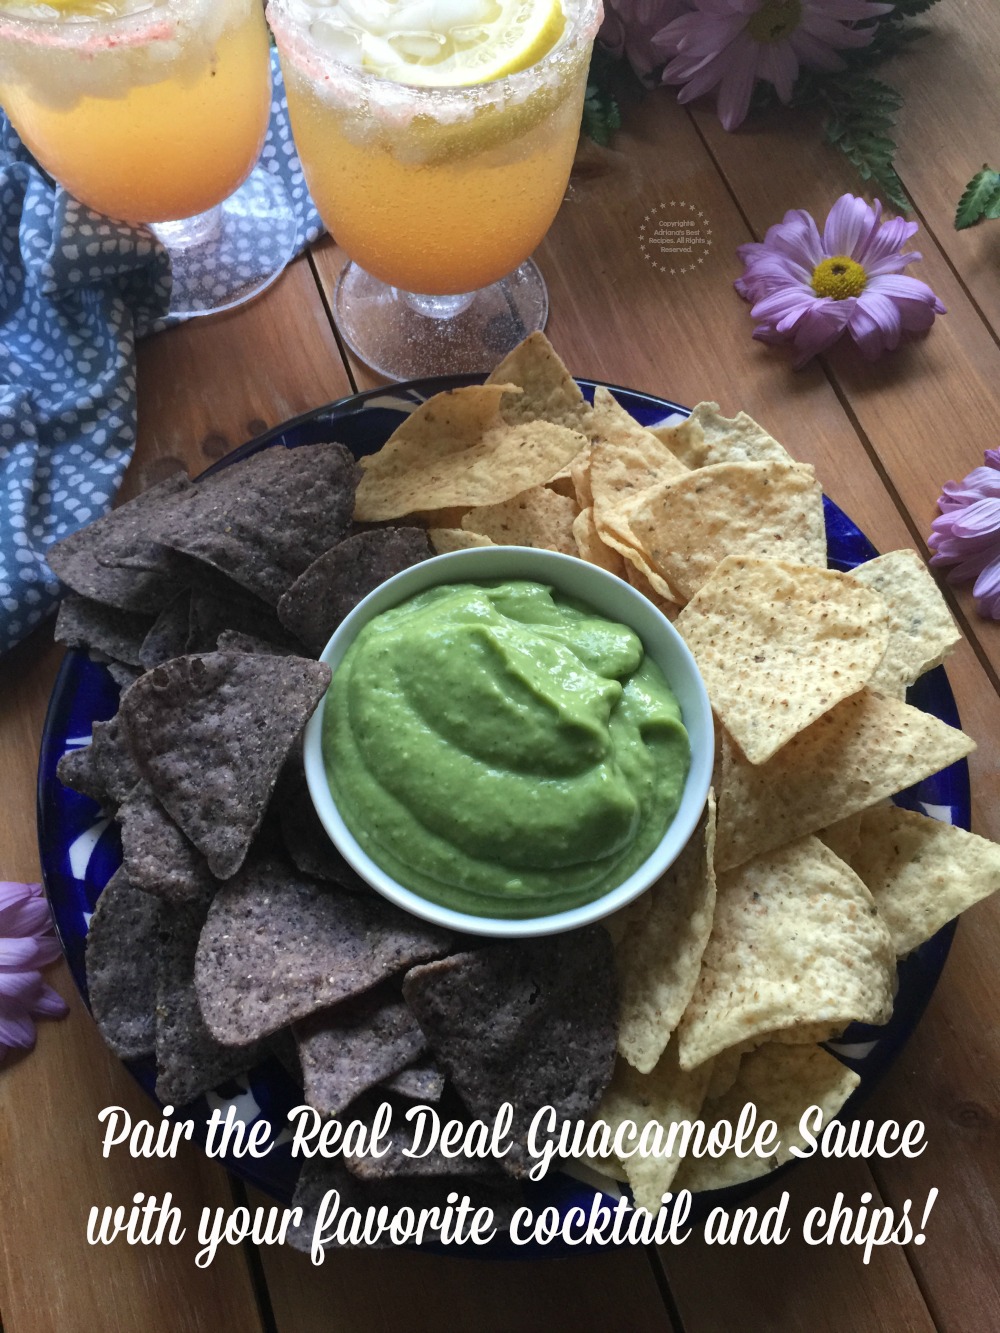 Pair the real deal guacamole sauce with your favorite chips and a cocktail